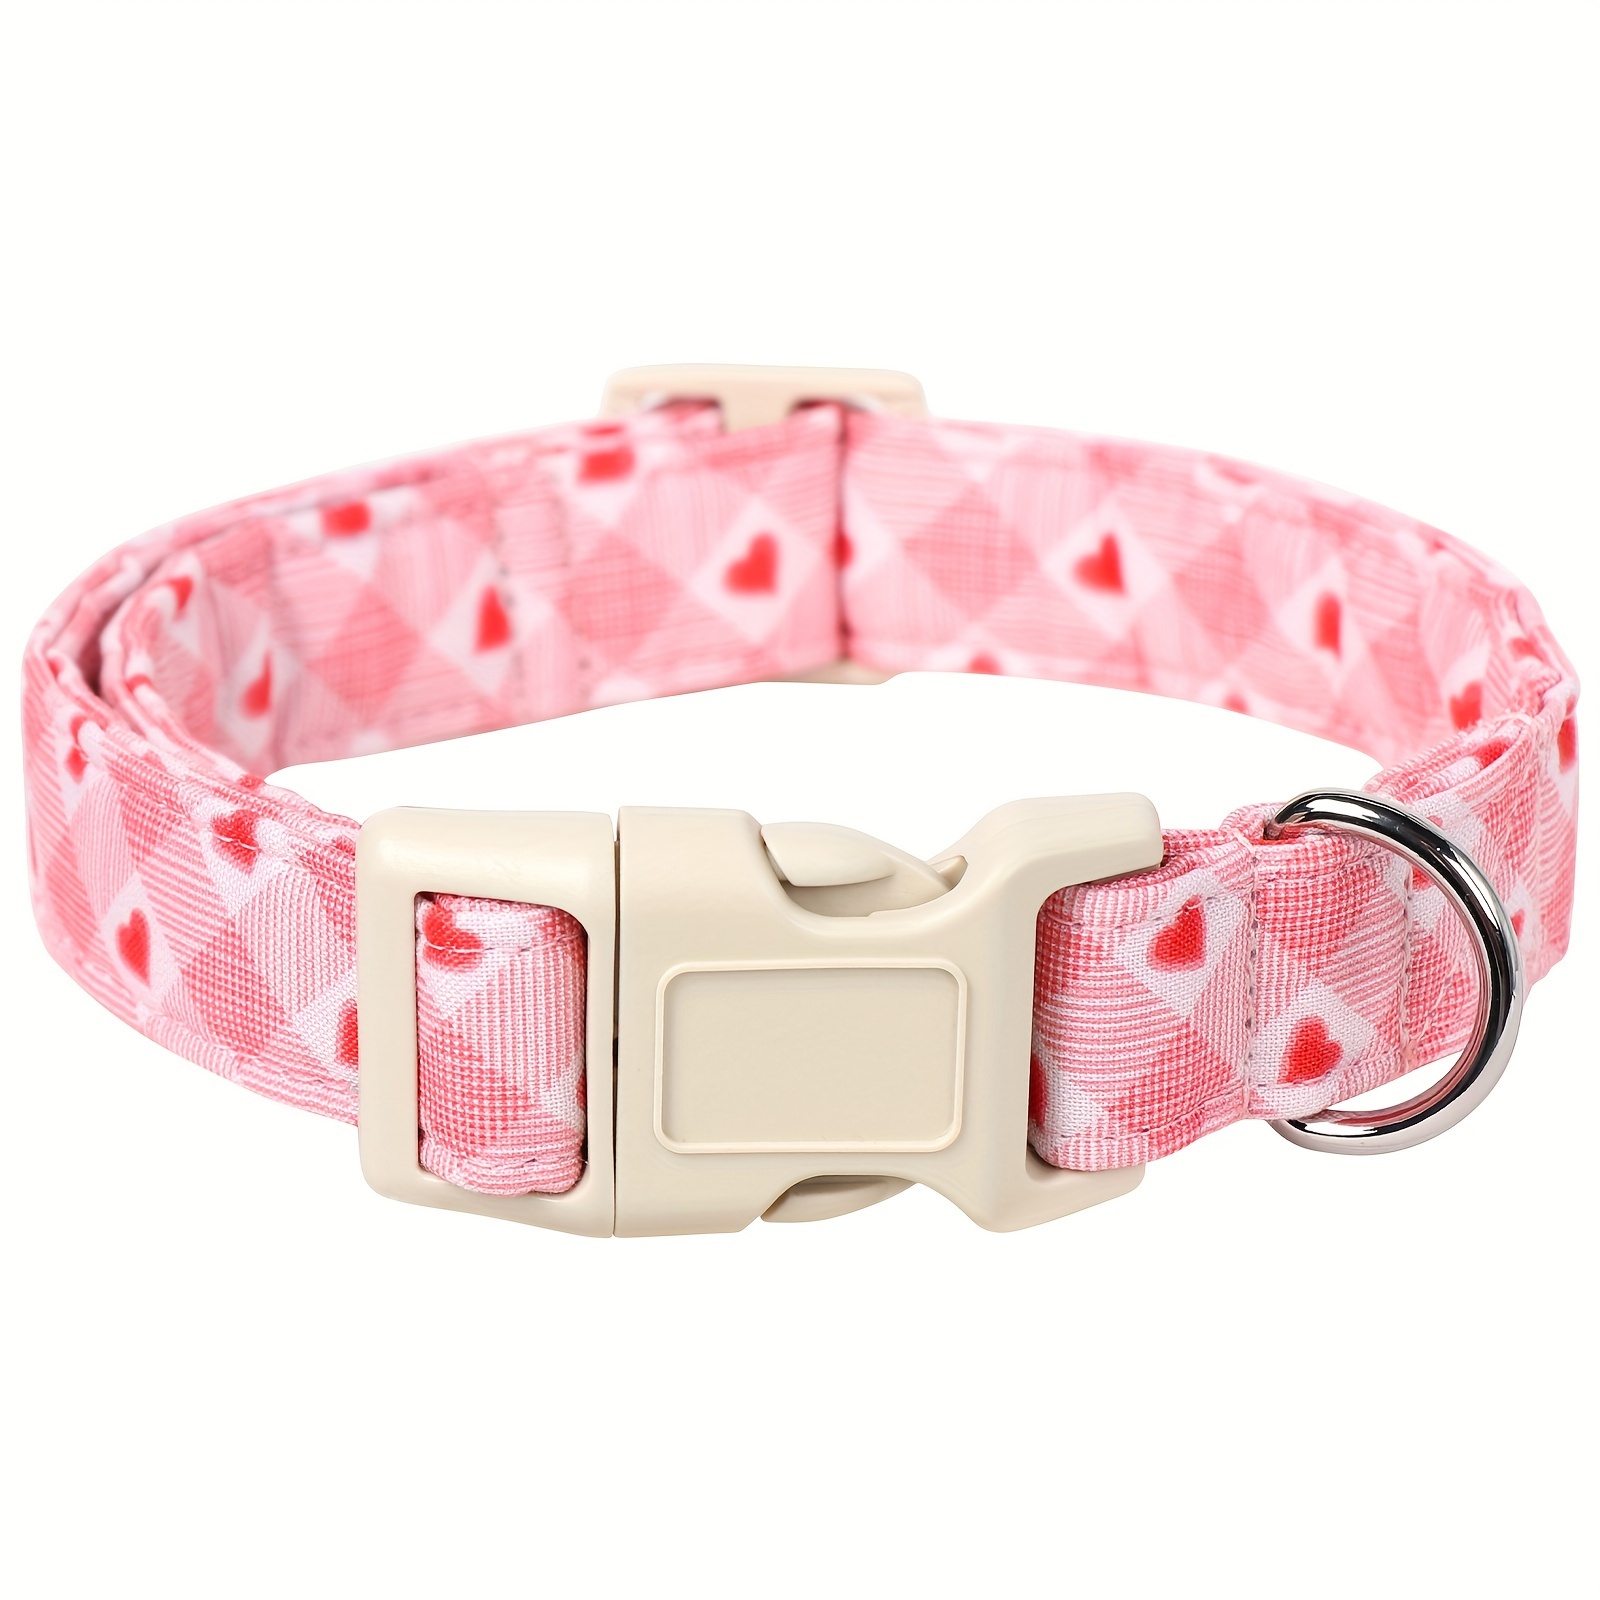 

1pc Cute Dog Collar With Love Heart Patten, Stylish Soft Cotton Dog Collar With Quick Release Buckle